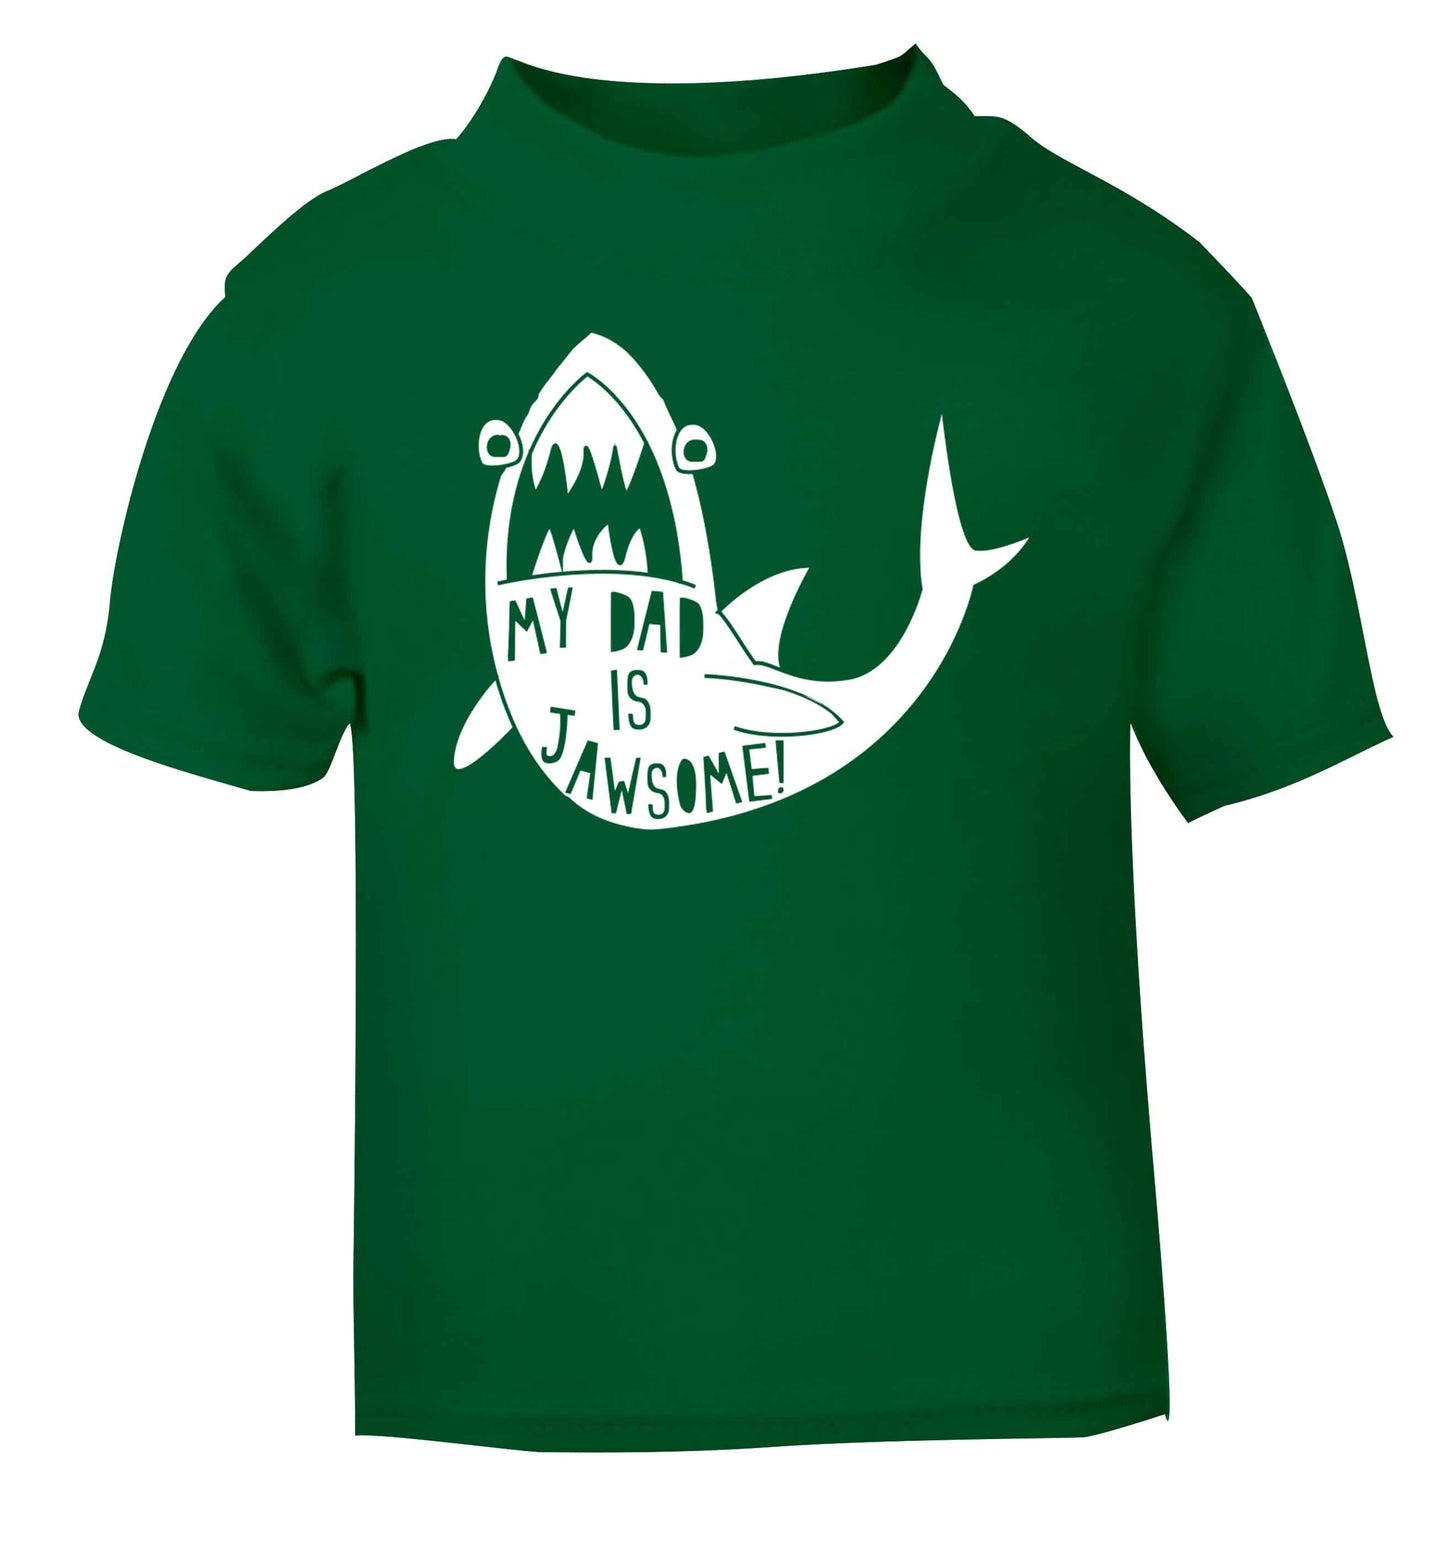 My Dad is jawsome green baby toddler Tshirt 2 Years